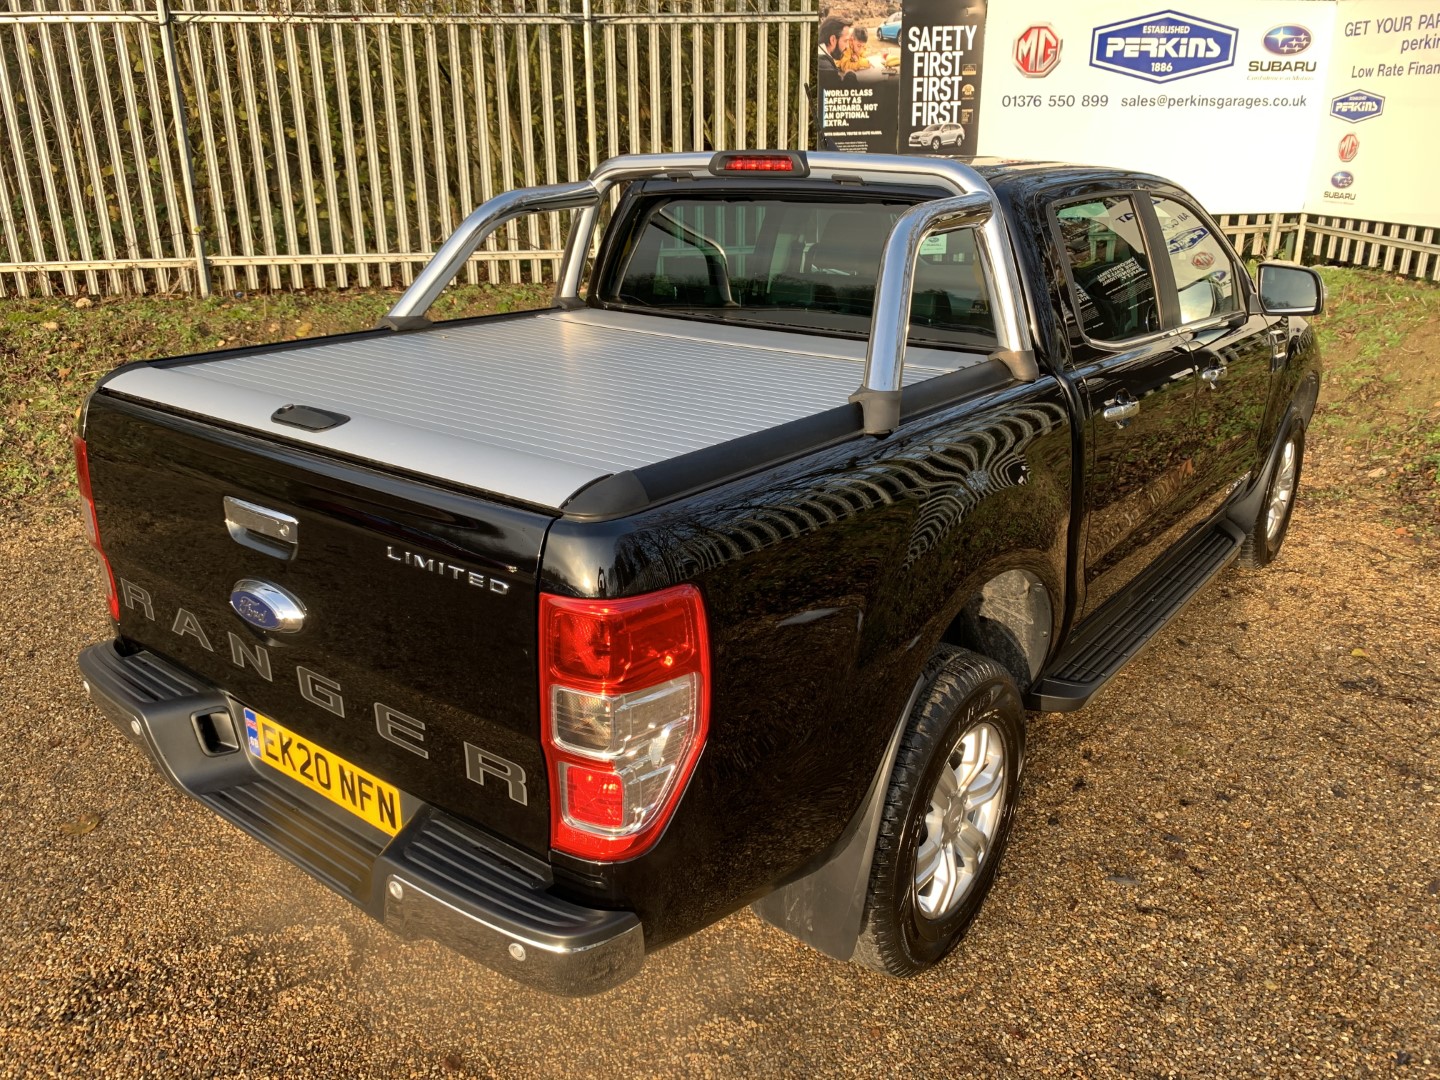 Chelmsford Used Ford Ranger for sale no vat